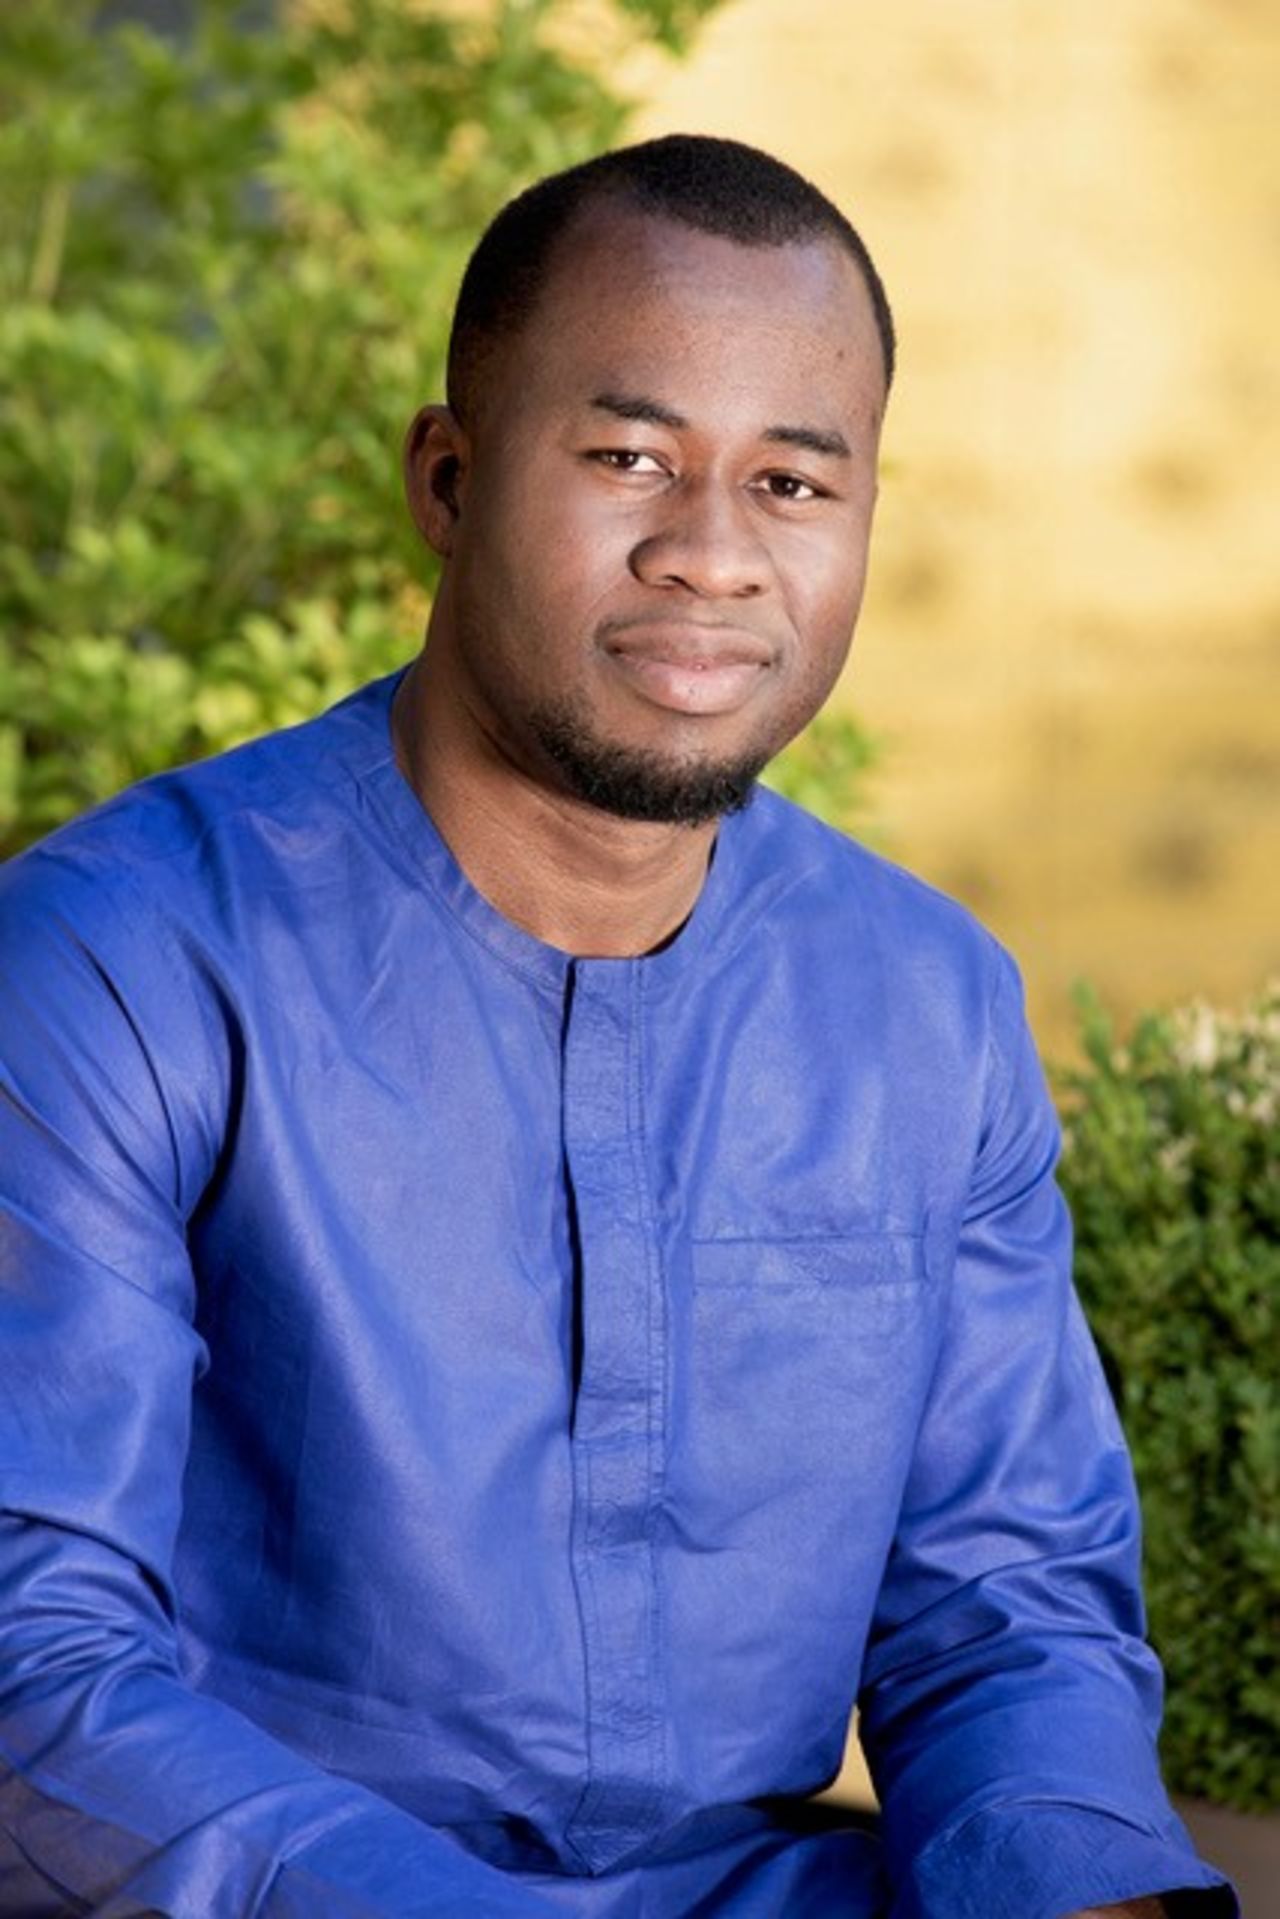 Nigerian <strong>Chigozie Obioma</strong> has twice been shortlisted for the Booker Prize, for his novels "The Fishermen" and "An Orchestra of Minorities."<br />Obioma was named by Foreign Policy magazine as one of its "100 leading global thinkers of 2015." He is a professor of English and Creative Writing at the University of Nebraska-Lincoln, in the US.<br />